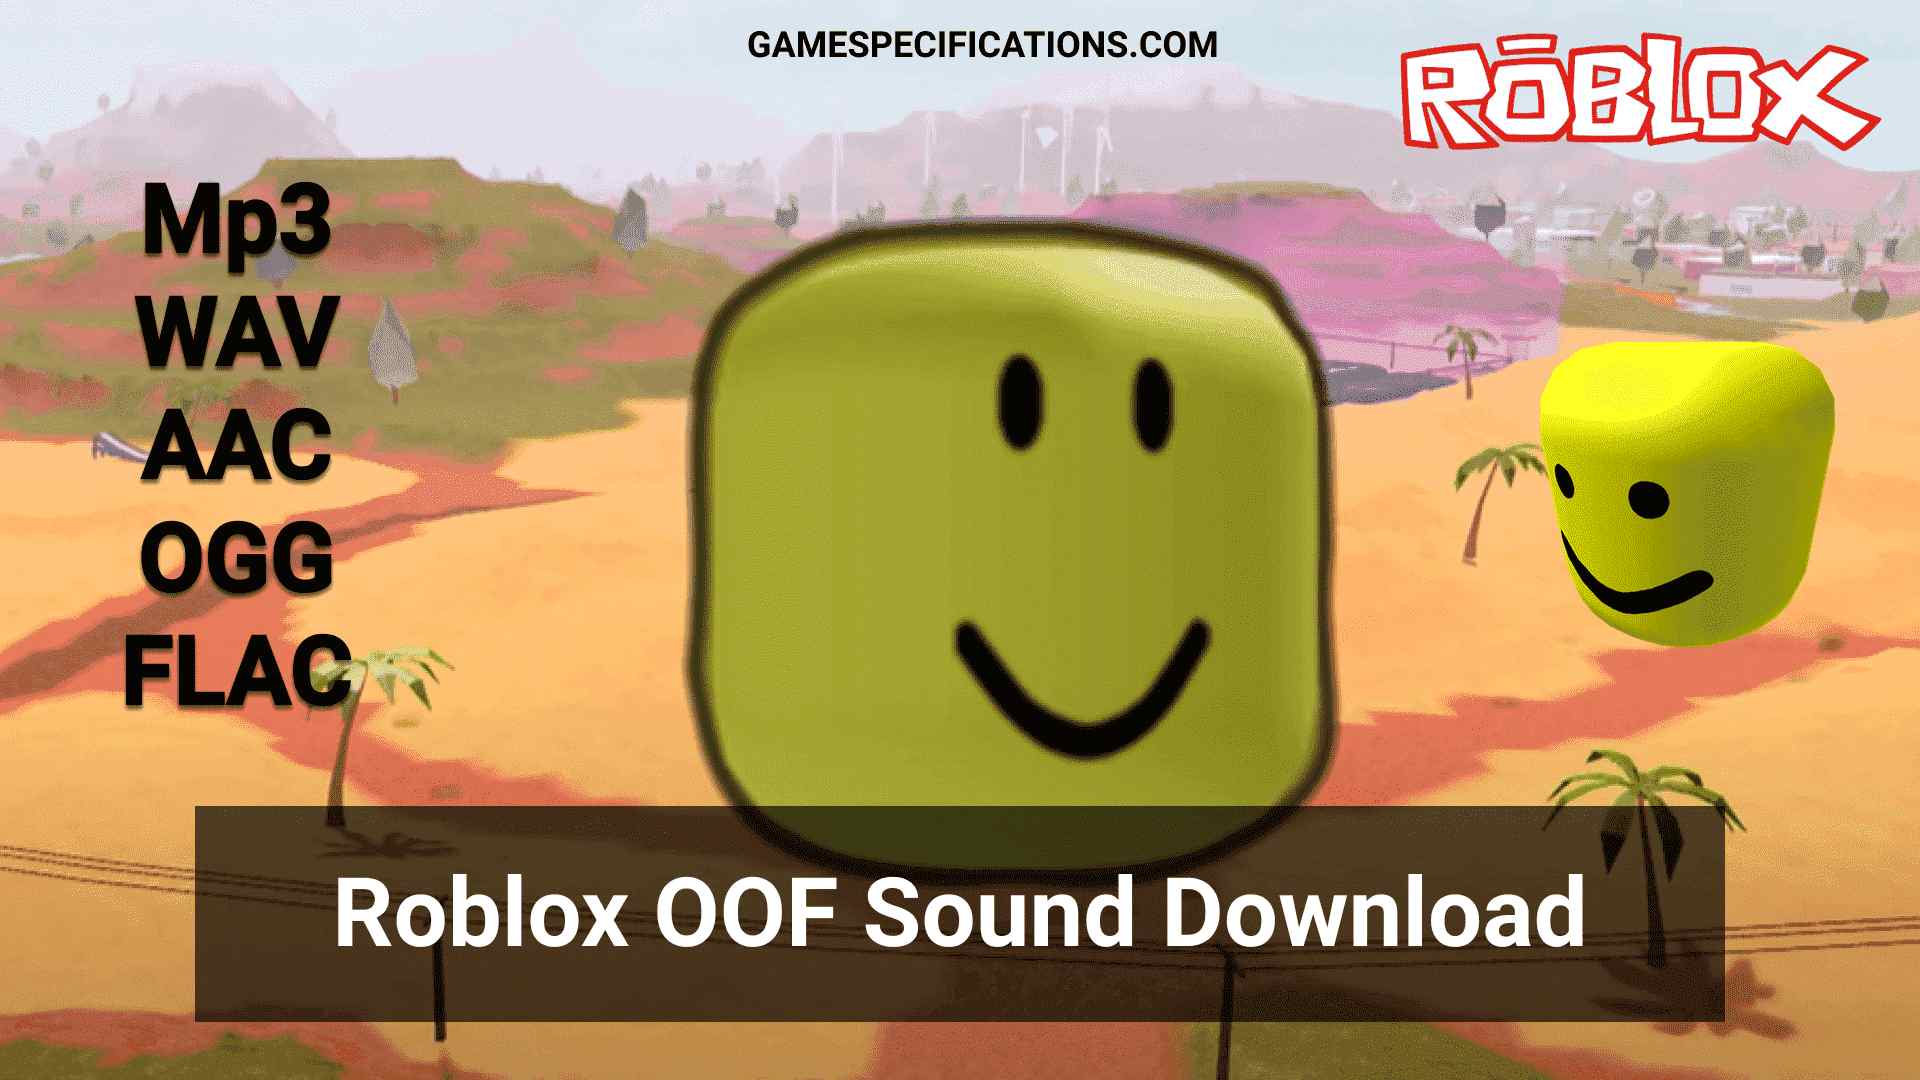 Roblox Oof Sound Download Mp3 Wav Aac Flac And Ogg Game Specifications - download types of oof roblox